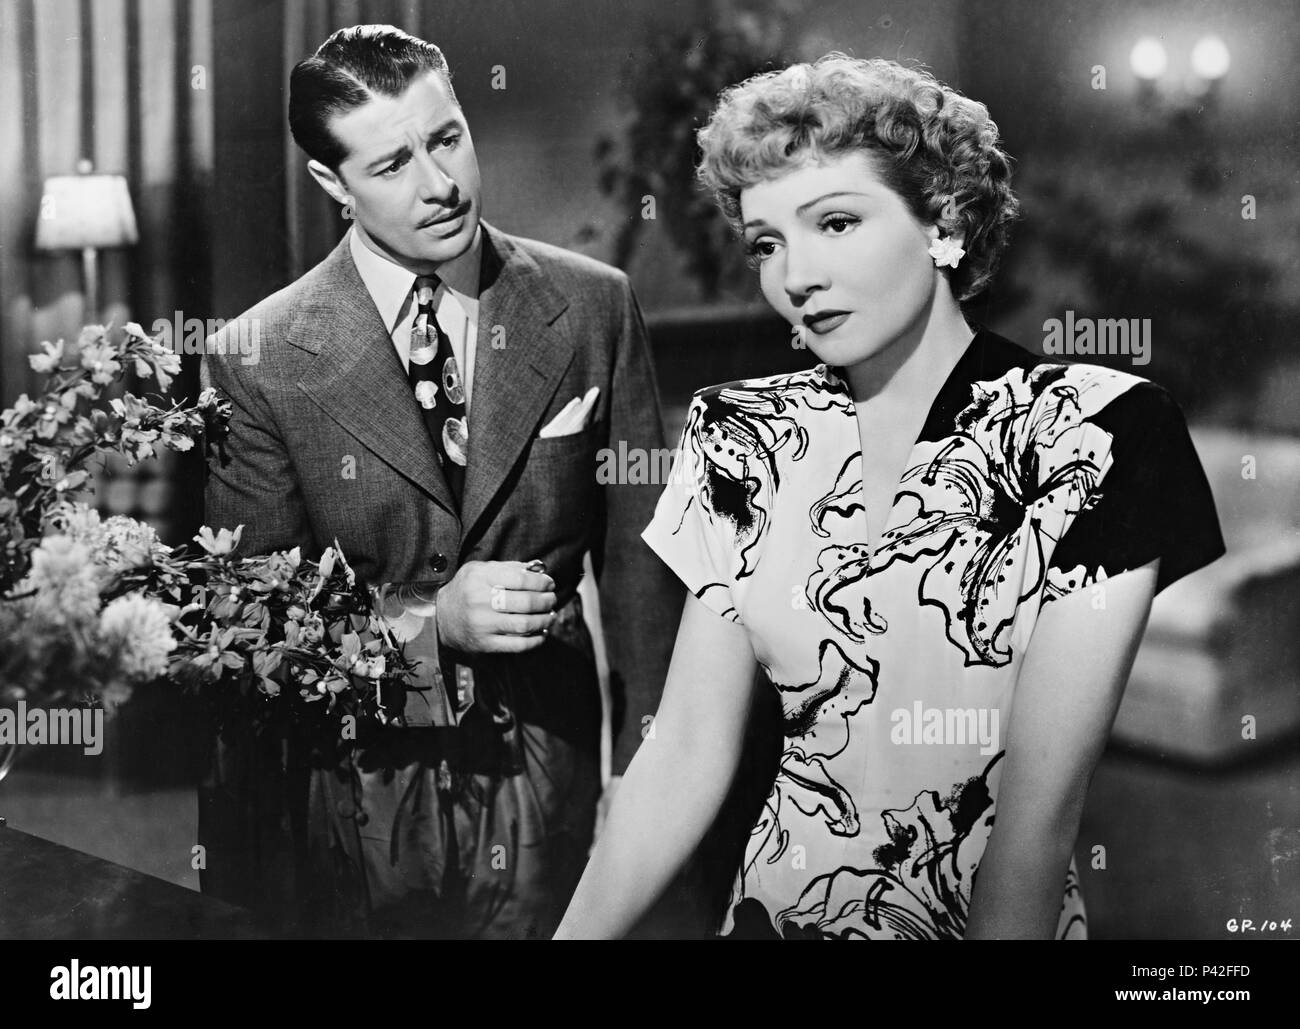 Original Film Title: GUEST WIFE.  English Title: GUEST WIFE.  Film Director: SAM WOOD.  Year: 1945.  Stars: CLAUDETTE COLBERT; DON AMECHE. Credit: UNITED ARTISTS / Album Stock Photo